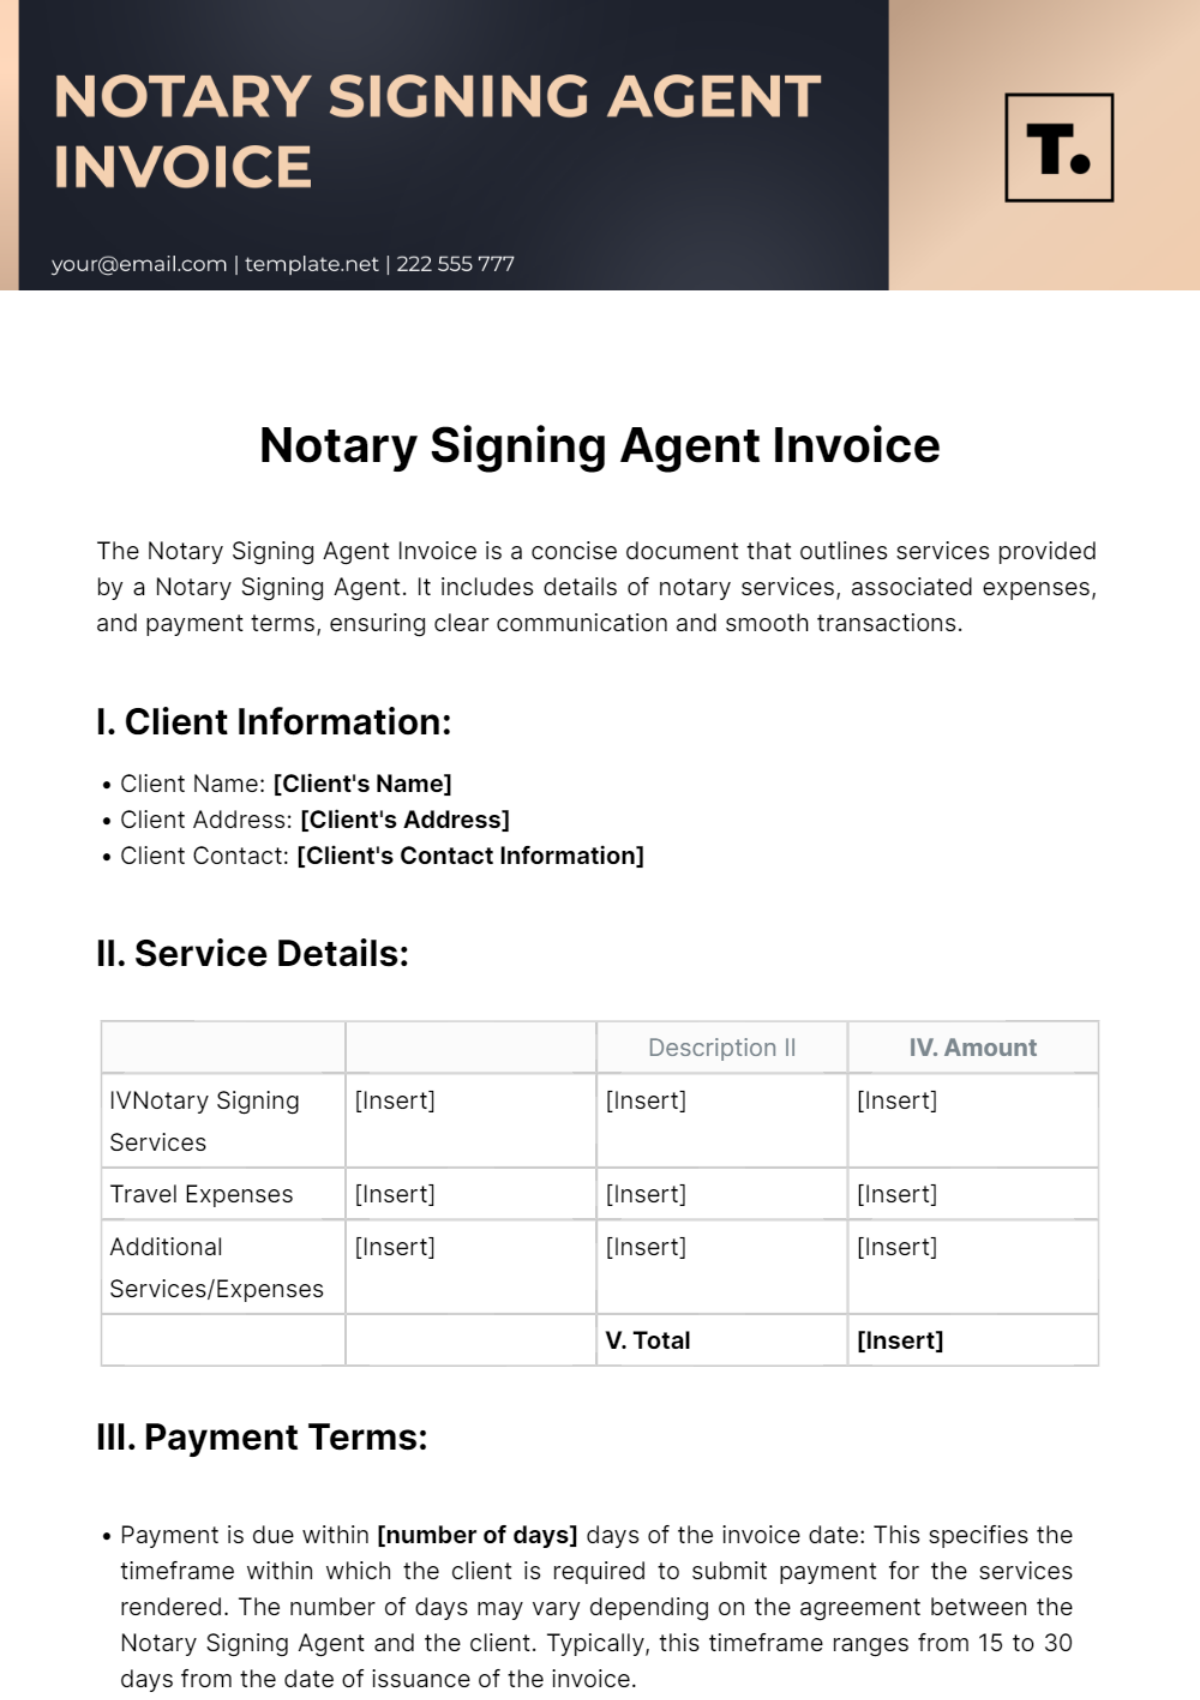 Free Notary Signing Agent Invoice Template